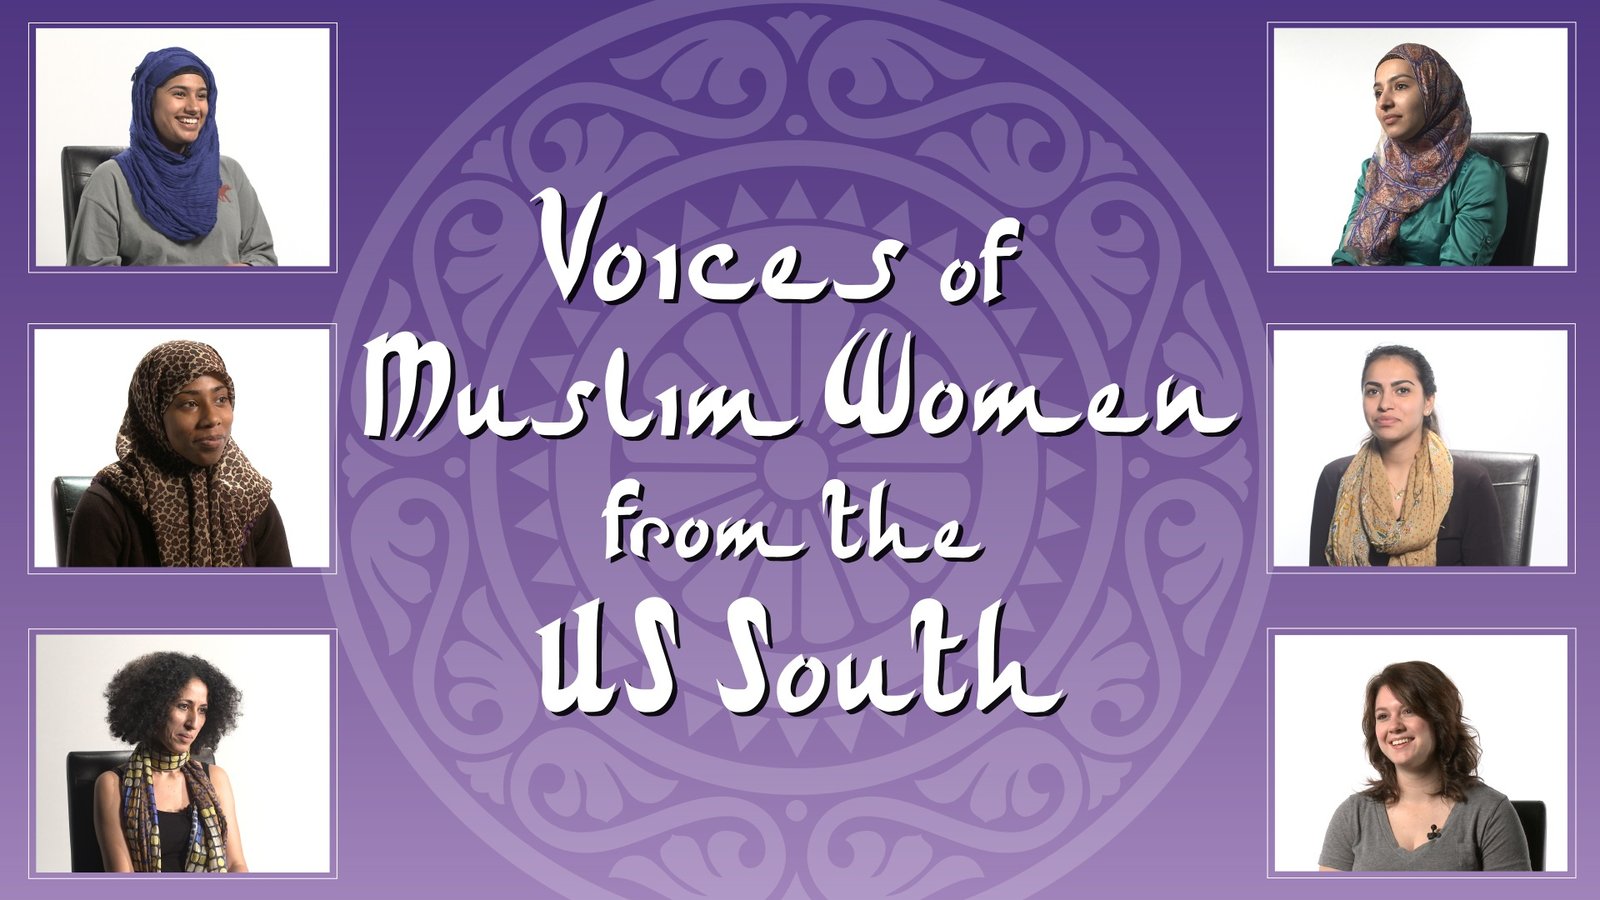 Voices of Muslim Women from the U.S South - Growing up Muslim the Southern United States